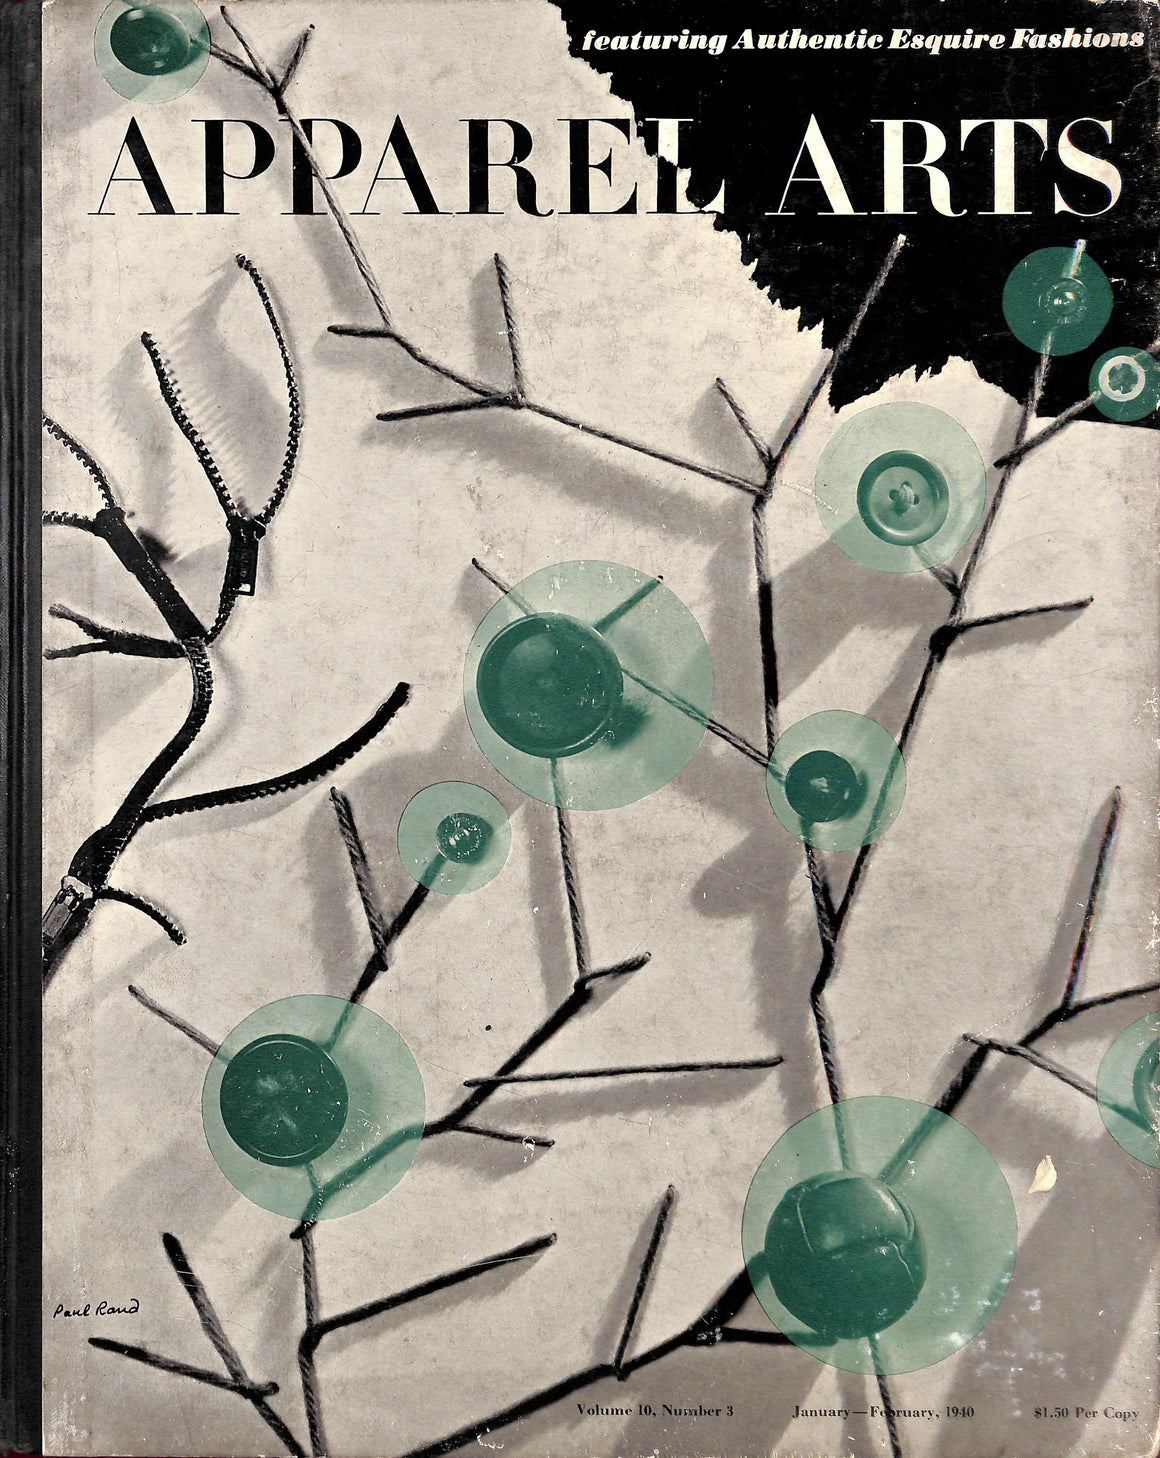 Apparel Arts: Volume 10, Number 3 - January/February, 1940 (SOLD)